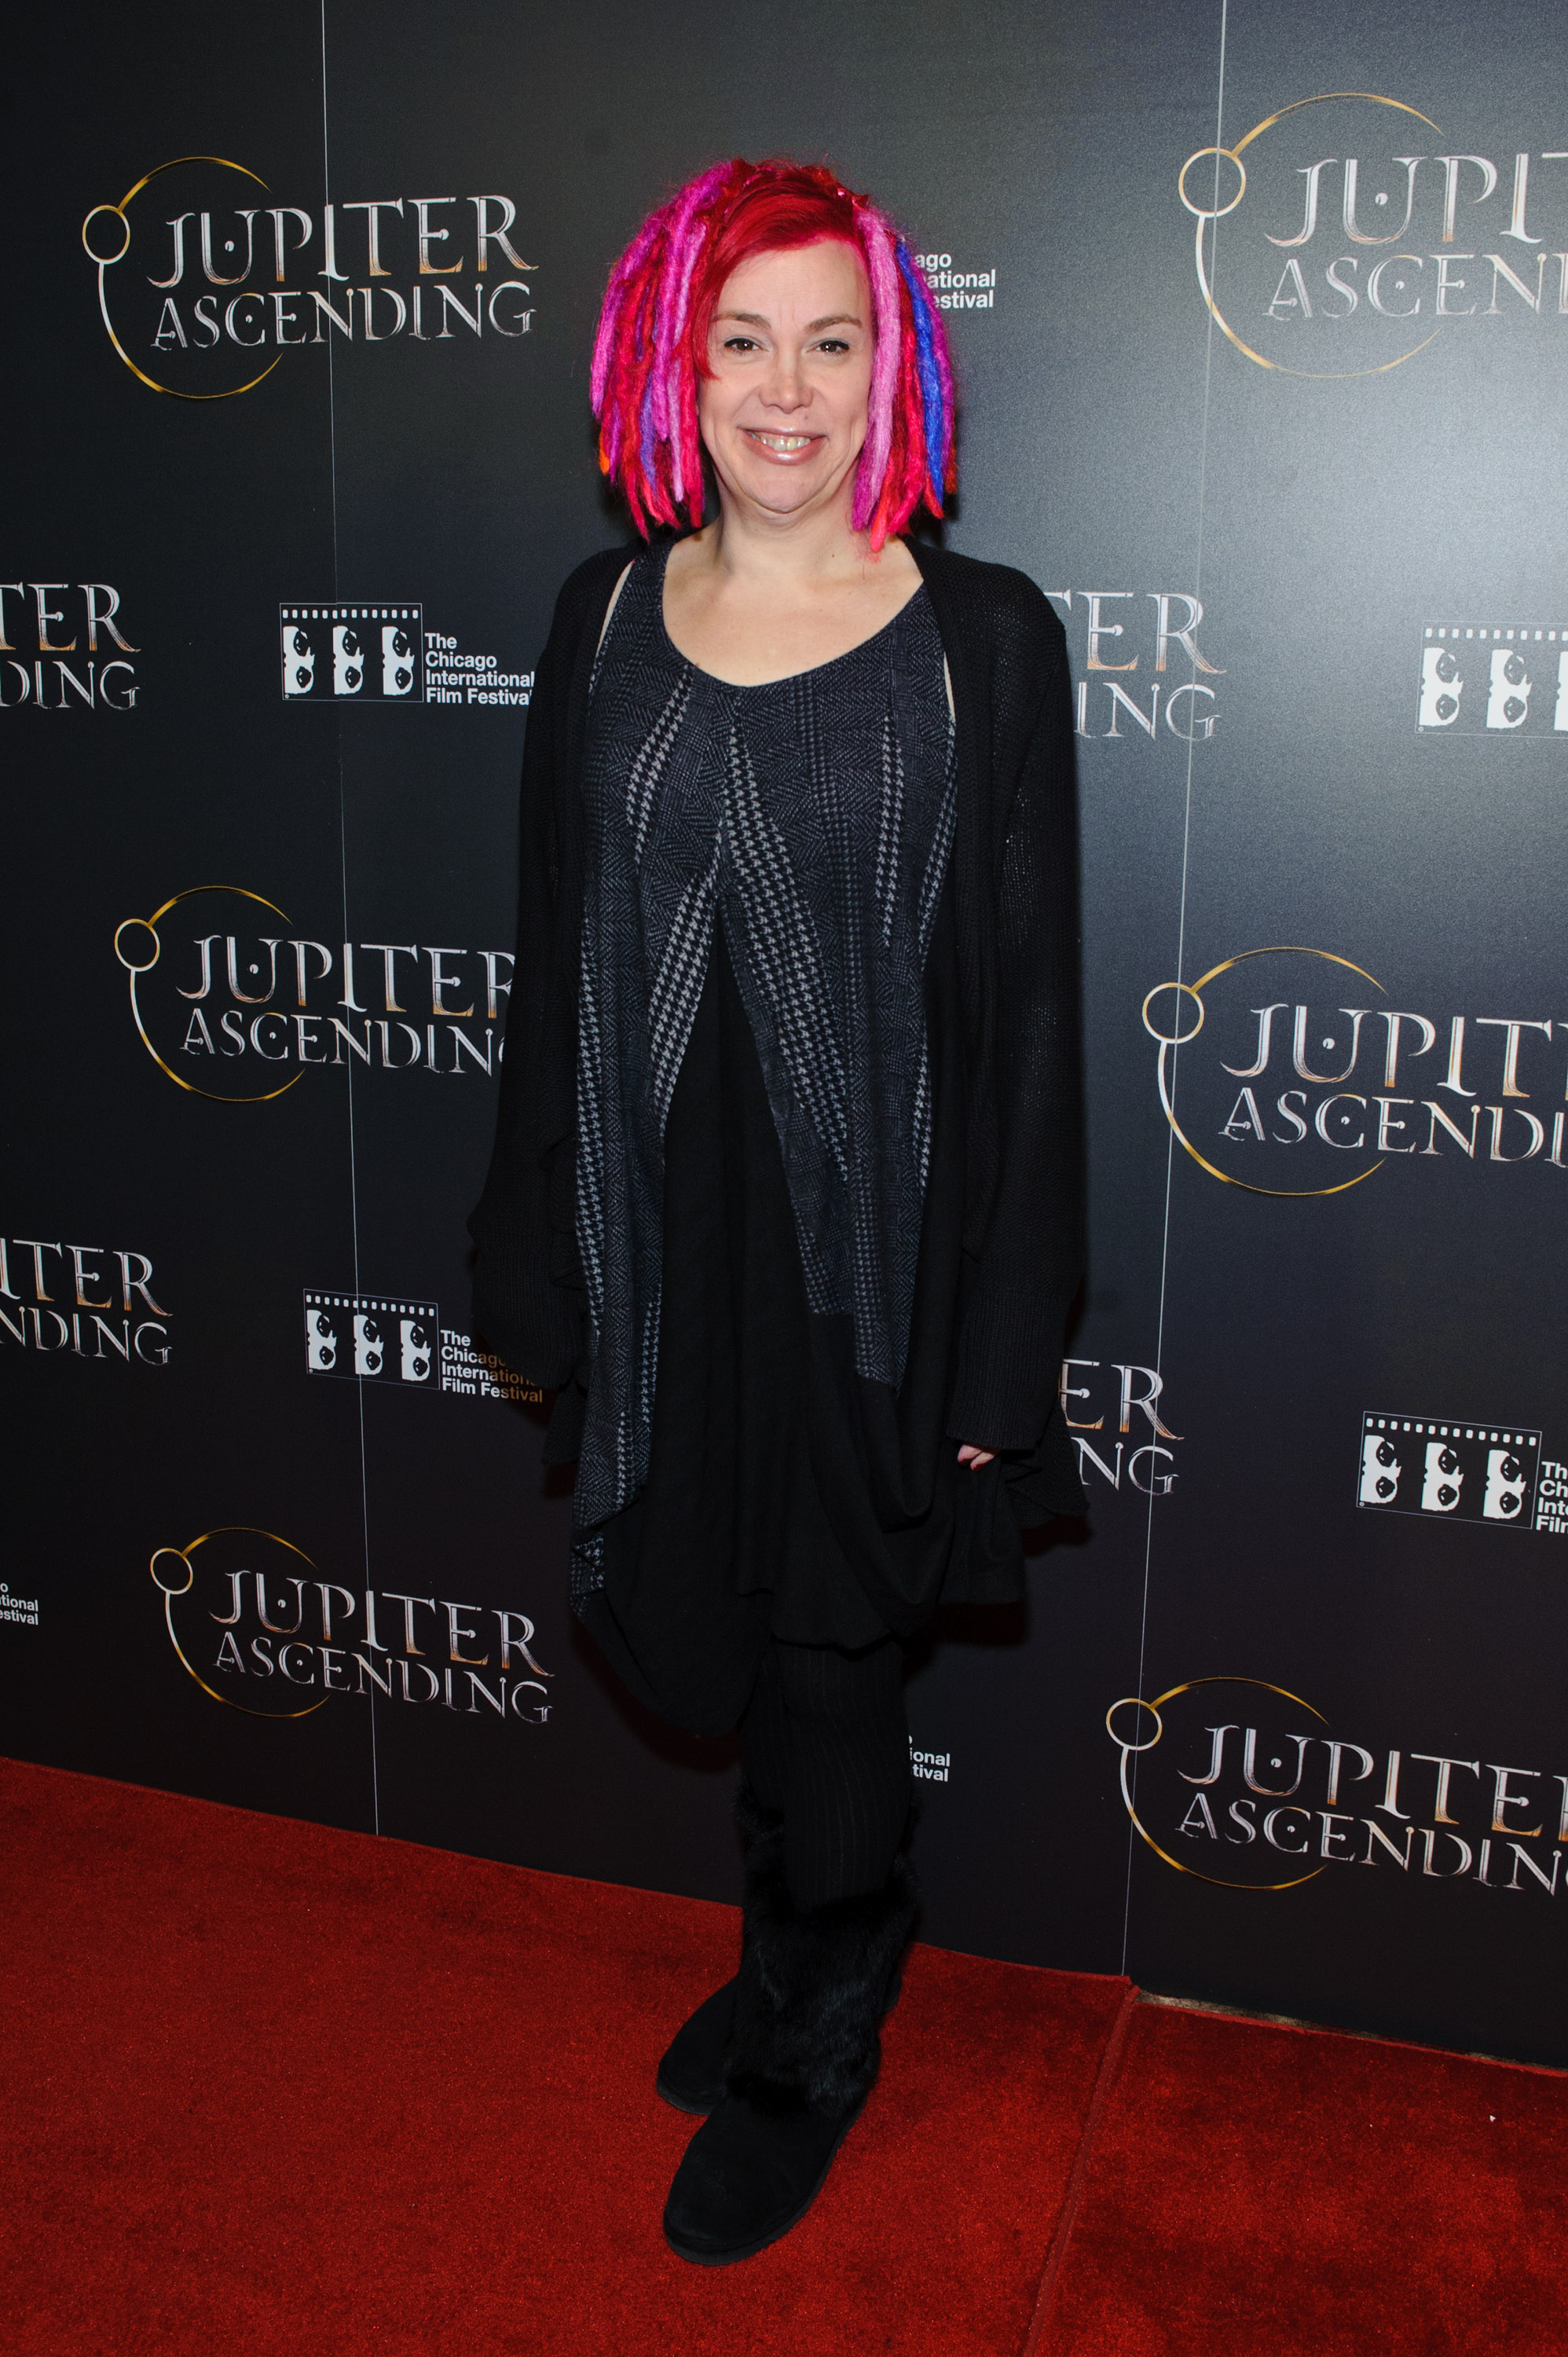 Lana Wachowski attends a screening of Jupiter Ascending at AMC River East Theater on February 4, 2015, in Chicago, Illinois. | Source: Getty Images